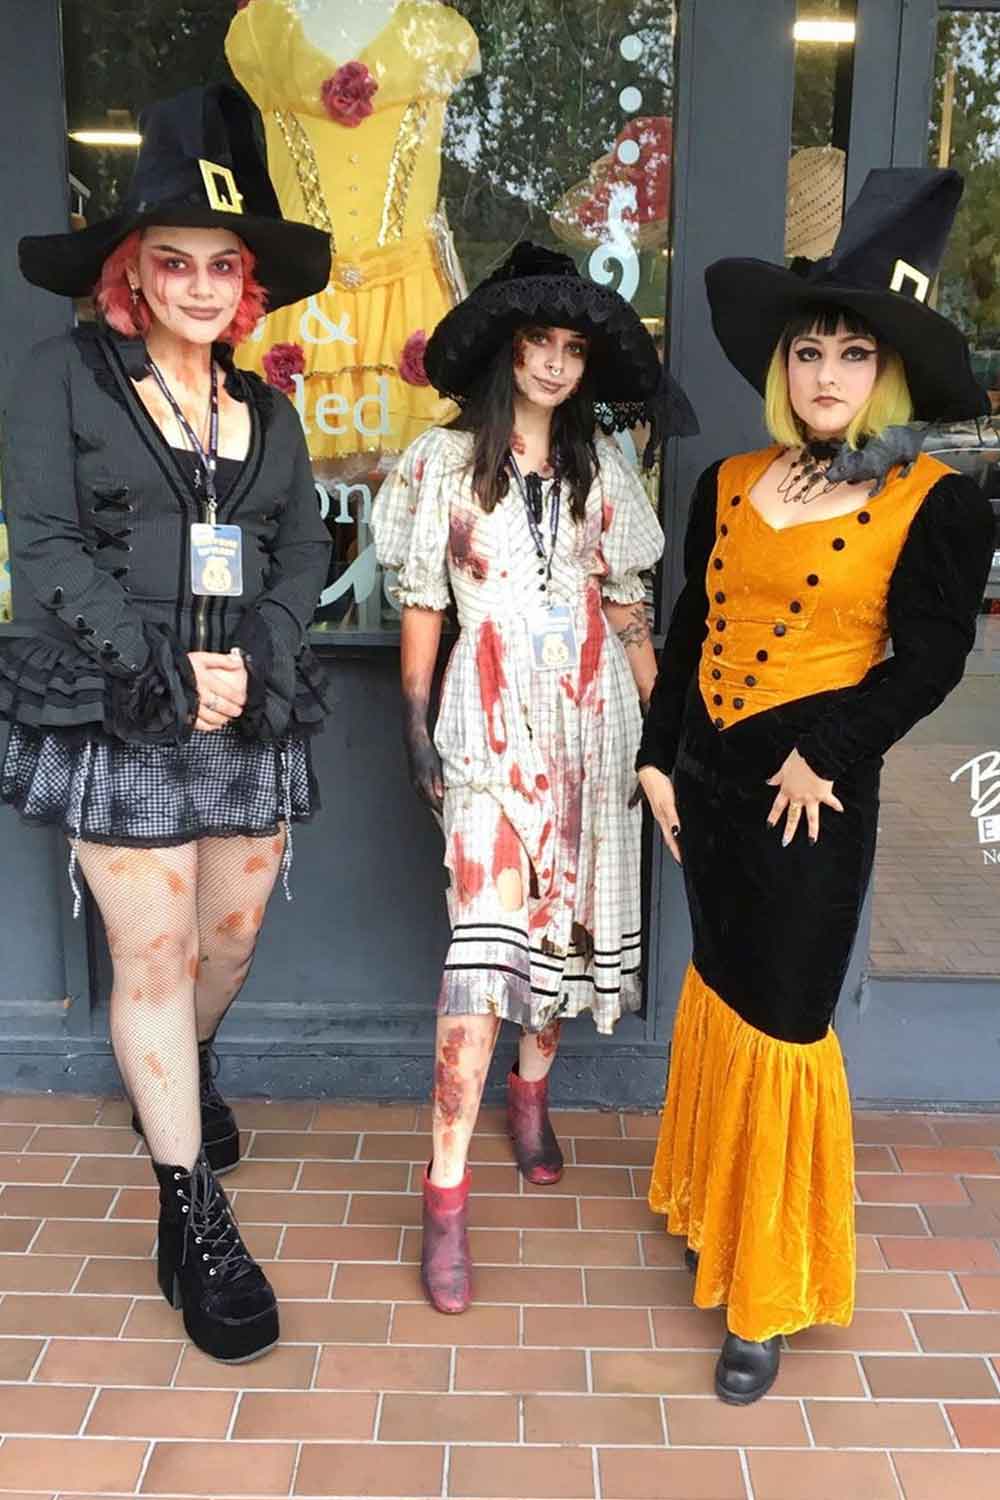 Spooky Witches Halloween Costumes